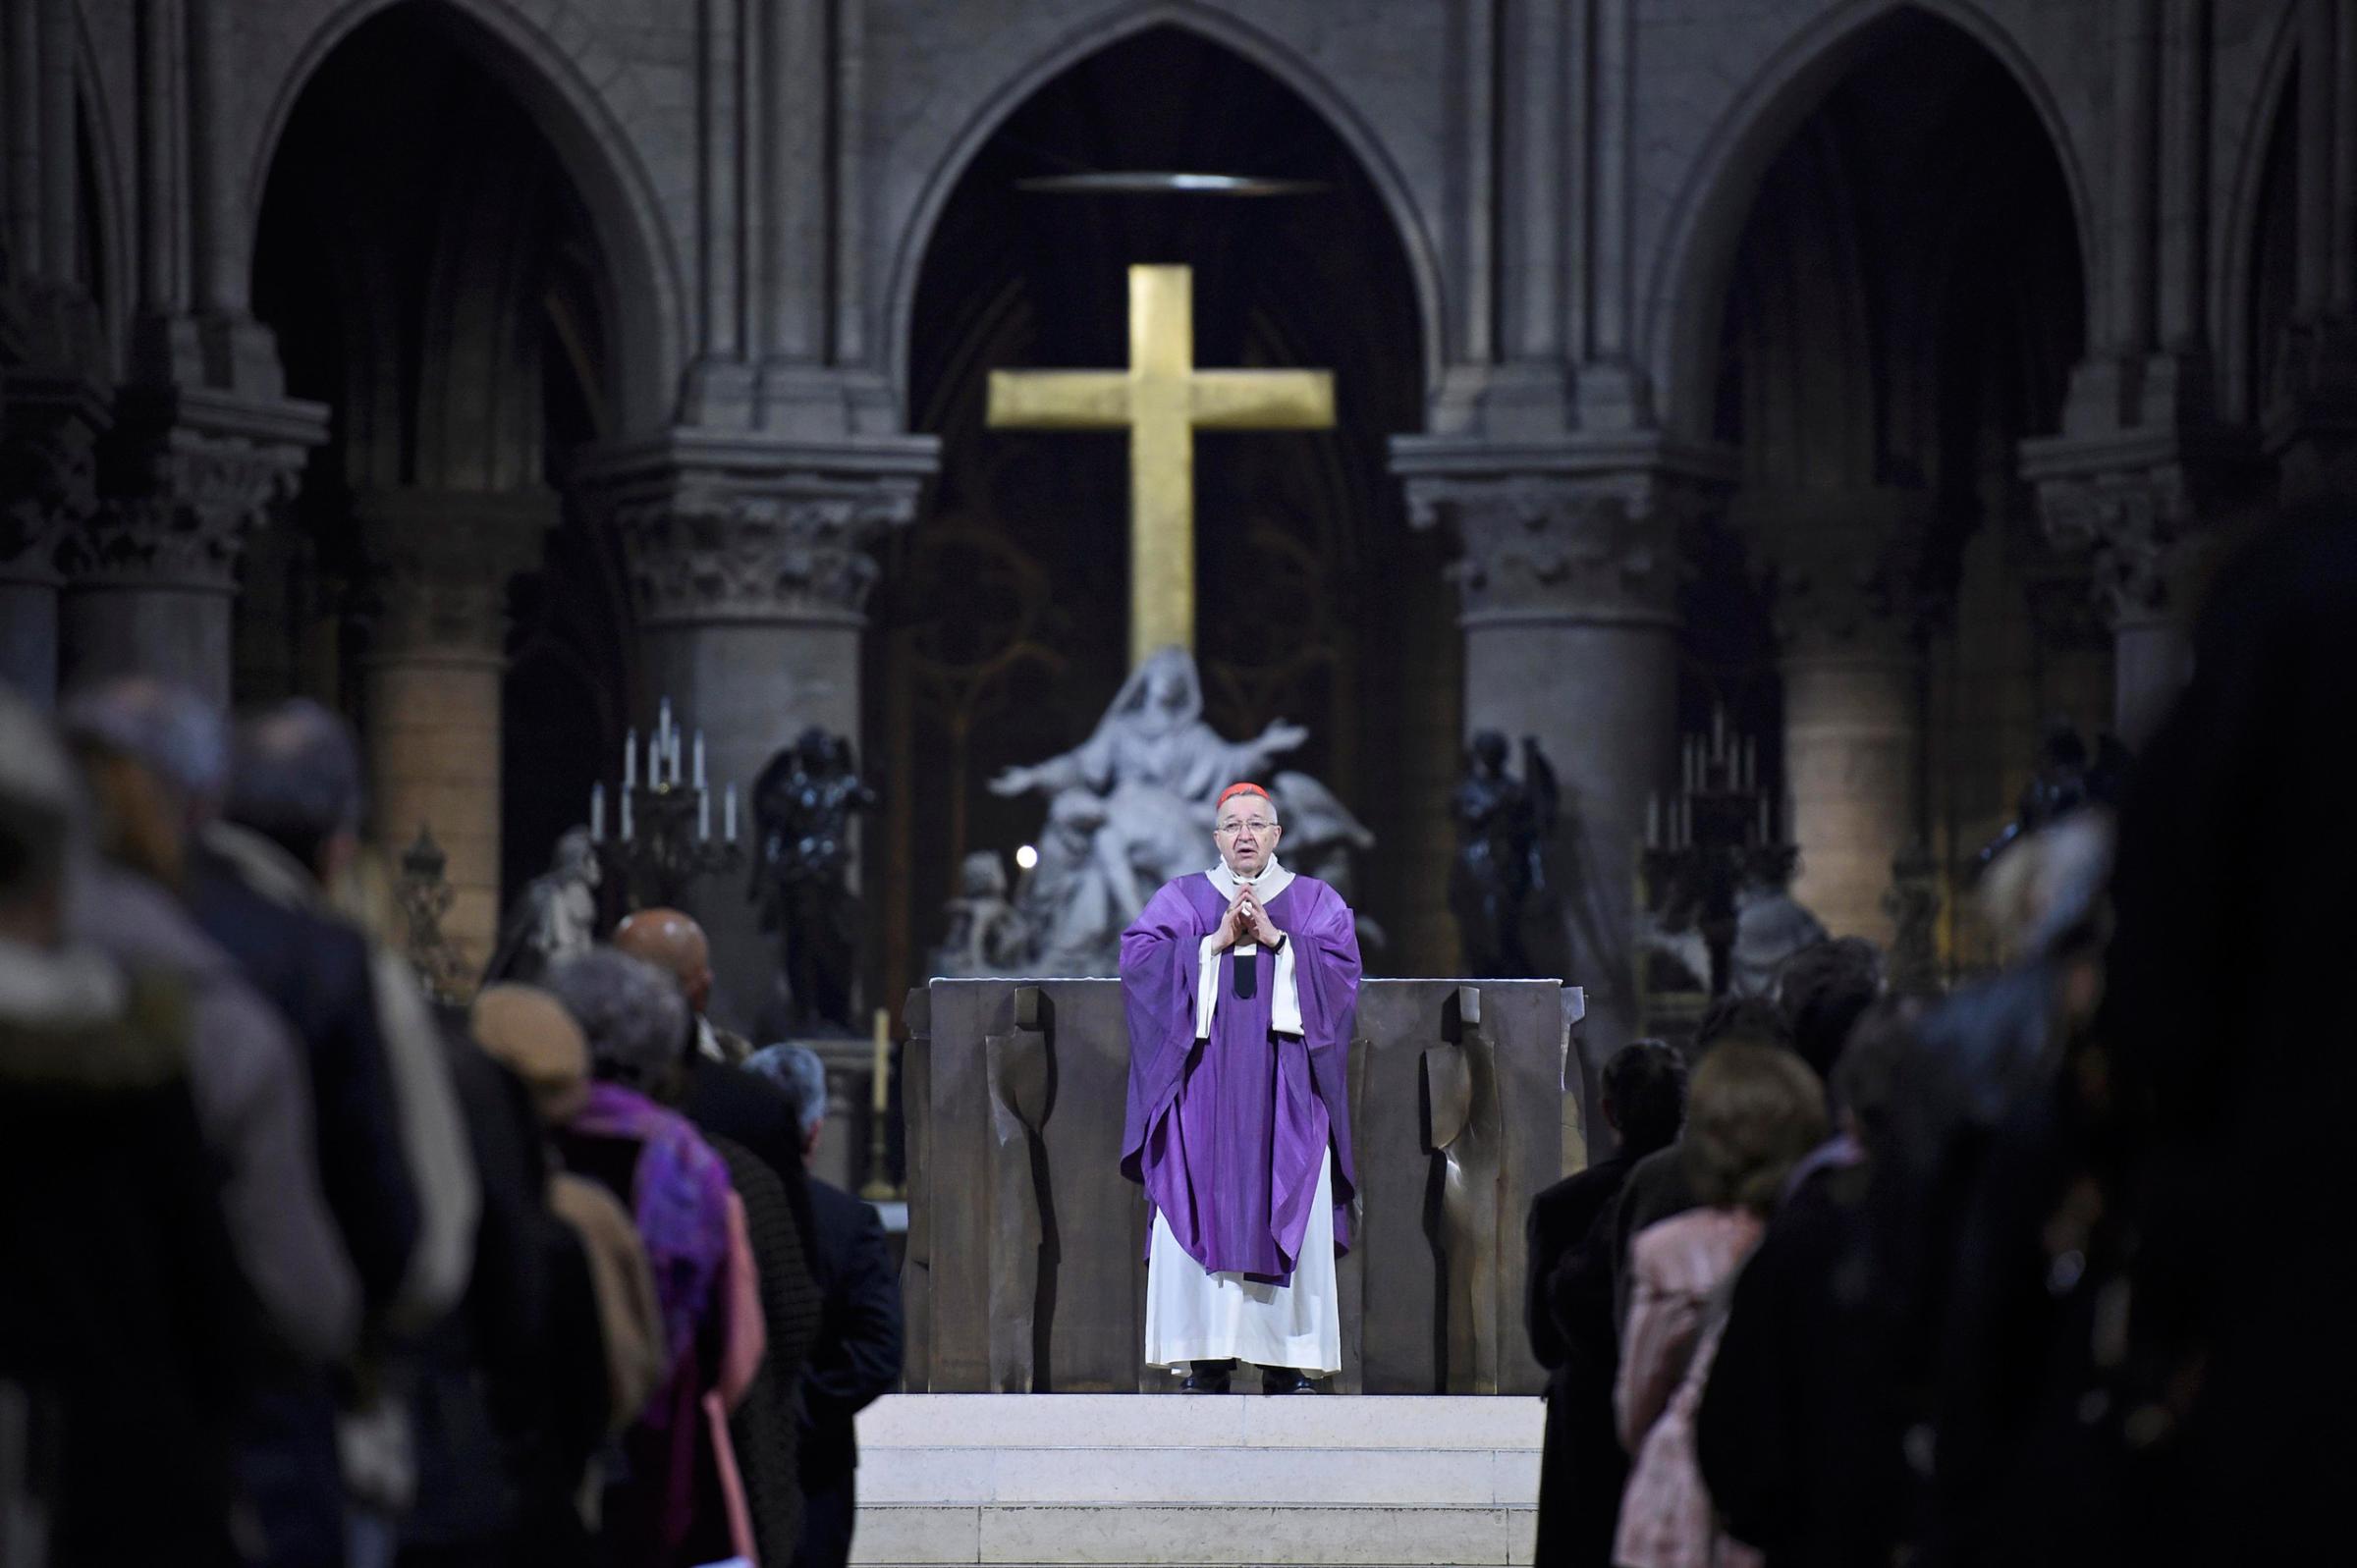 The Archbishop of Paris, Andre Vingt-Trois says mass at the Notre Dame Cathedral in Paris